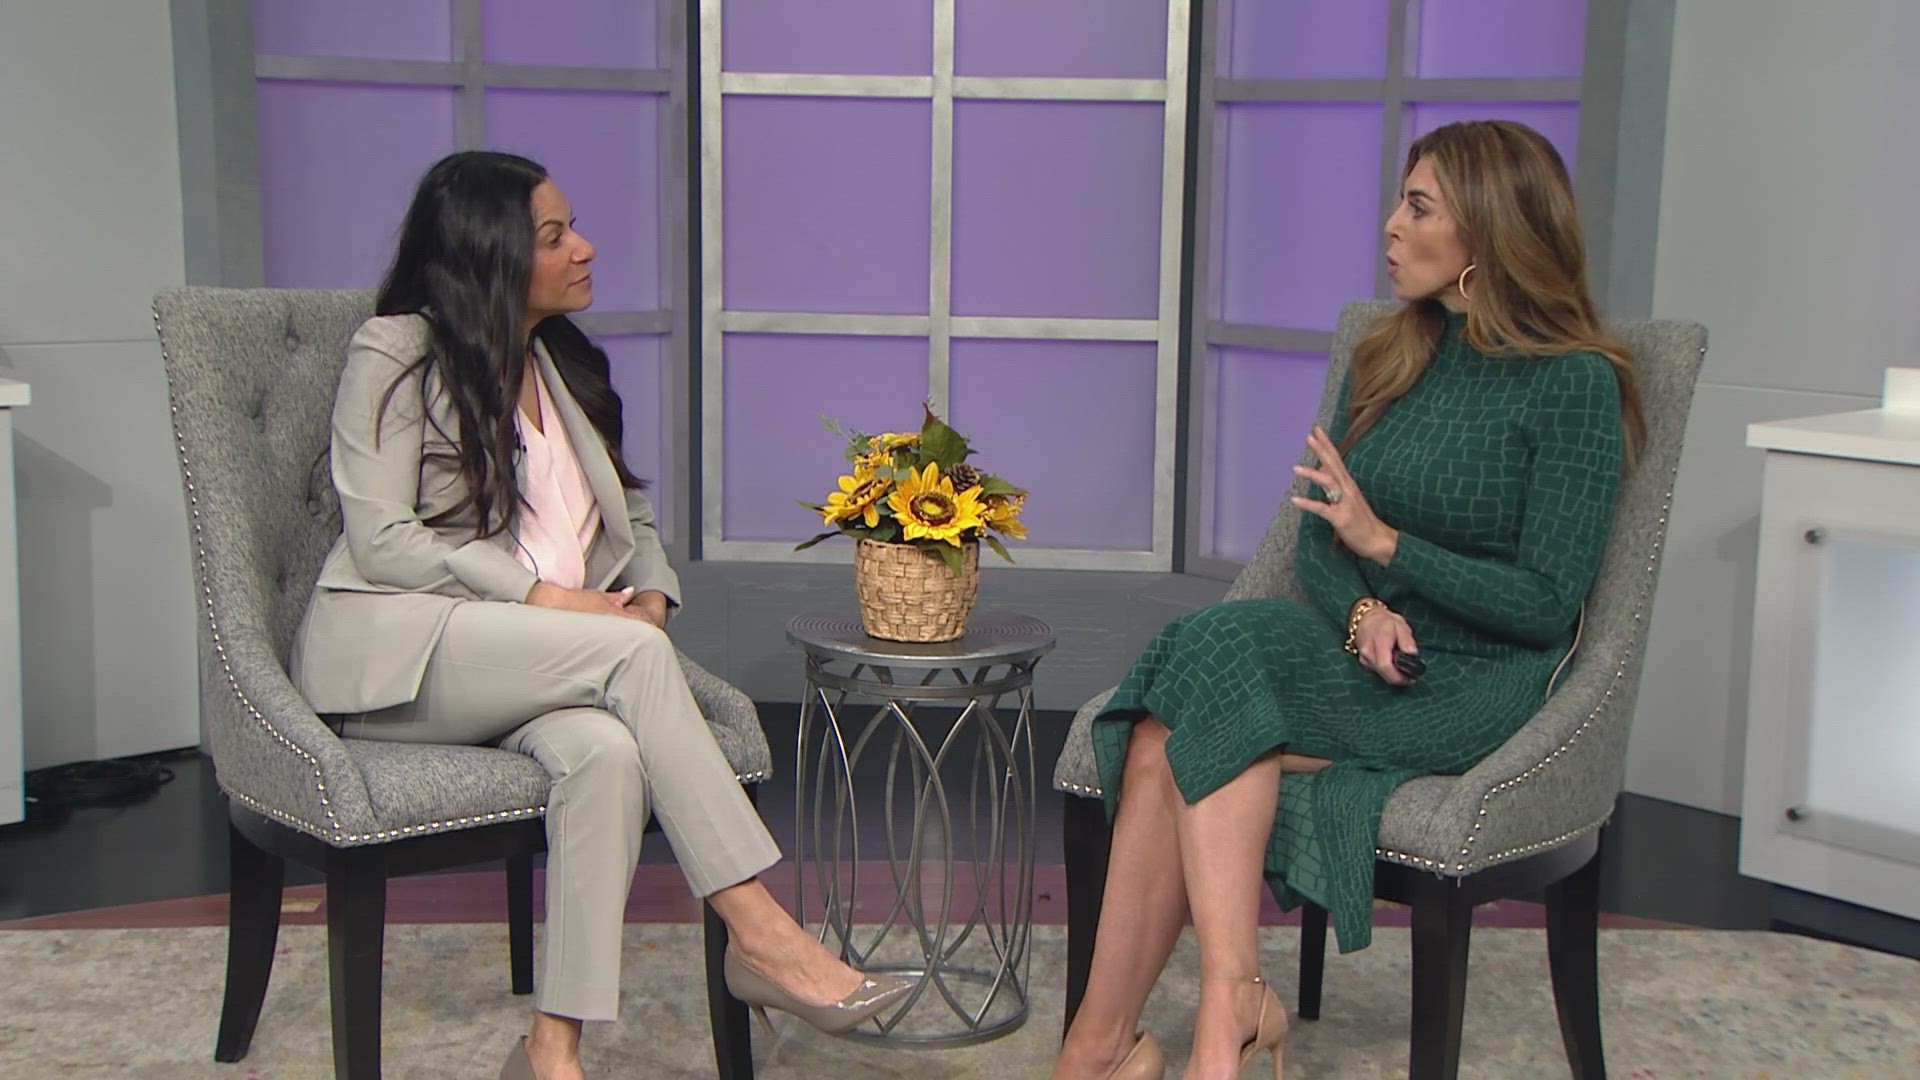 Parenting expert and psychologist Dr. Sheryl Ziegler talks about putting safety plans in place for your kids